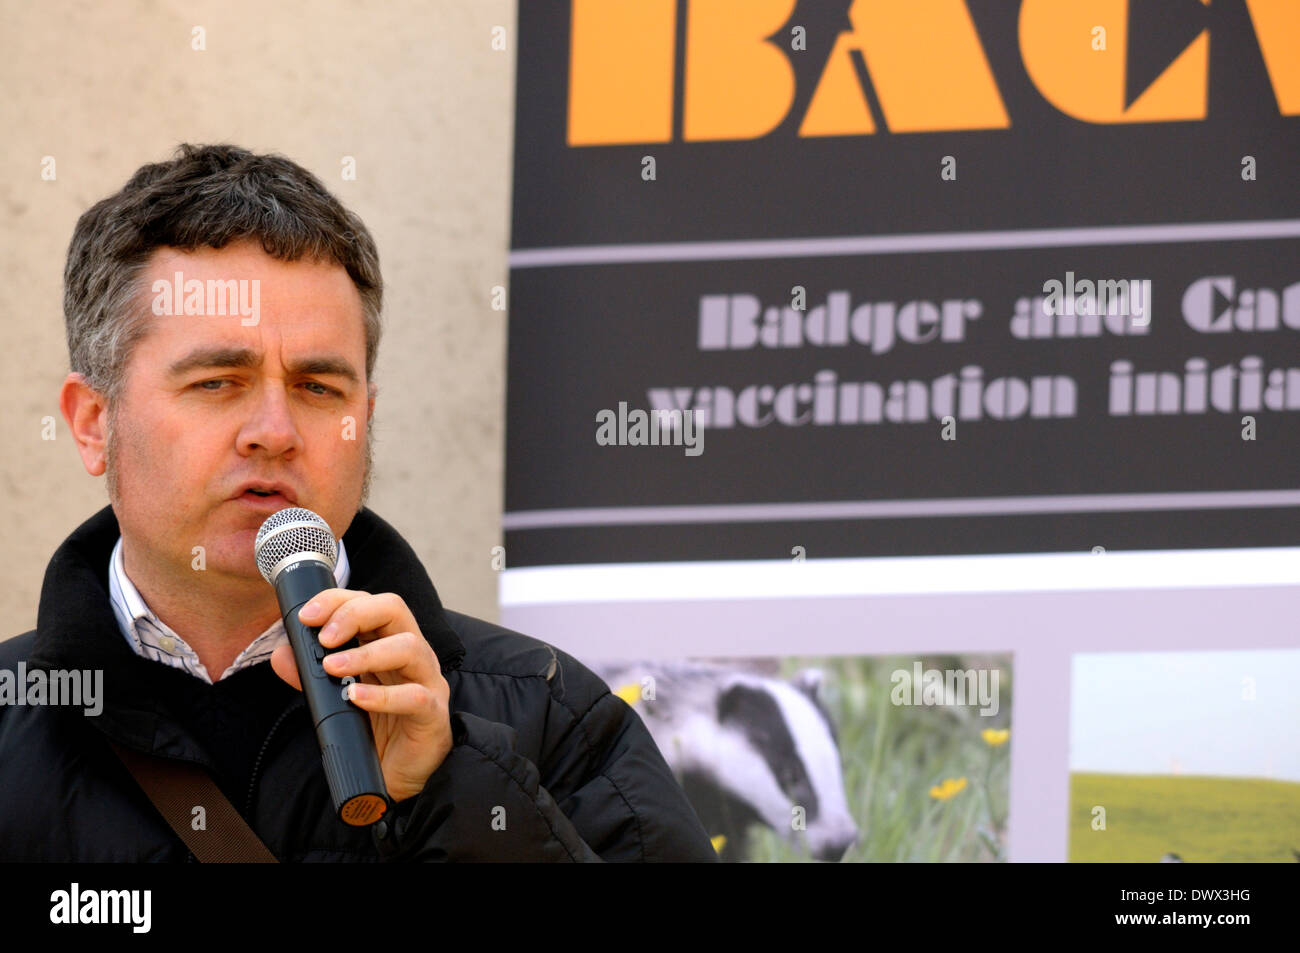 Dominic Dyer of the Badger Trust at an Anti badger cull protest outside parliament, 13th March 2014 Stock Photo